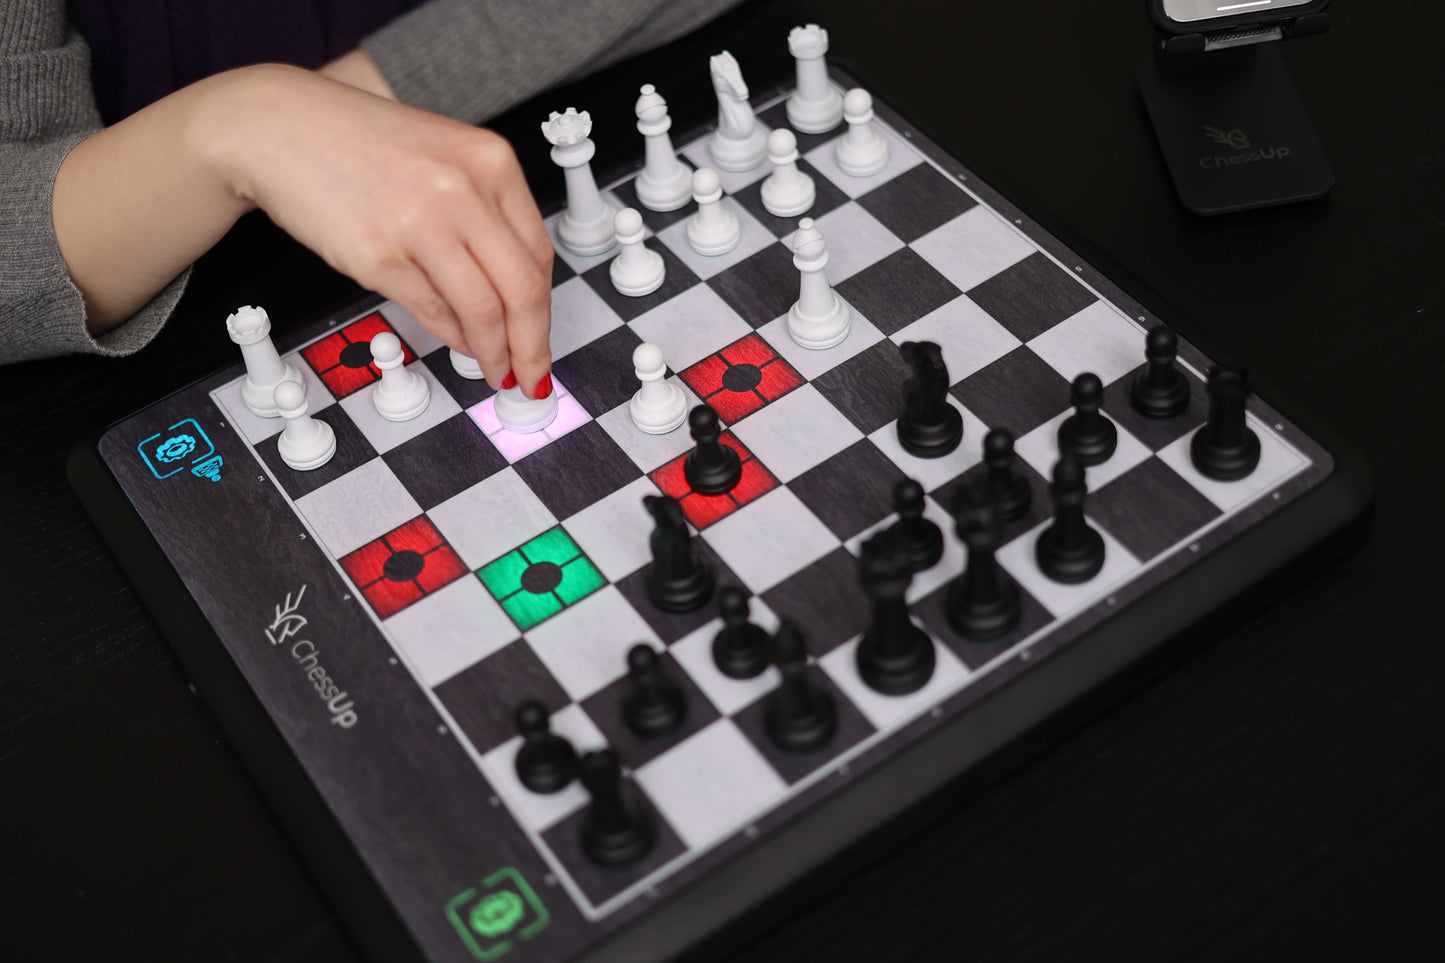  Bryght Labs - ChessUp - Electronic Chess Board - Built-in Chess  Engine and Instructor - Includes Chess Set TouchSense Pieces - Light Up  Chess Board - Features Wireless Play and Companion